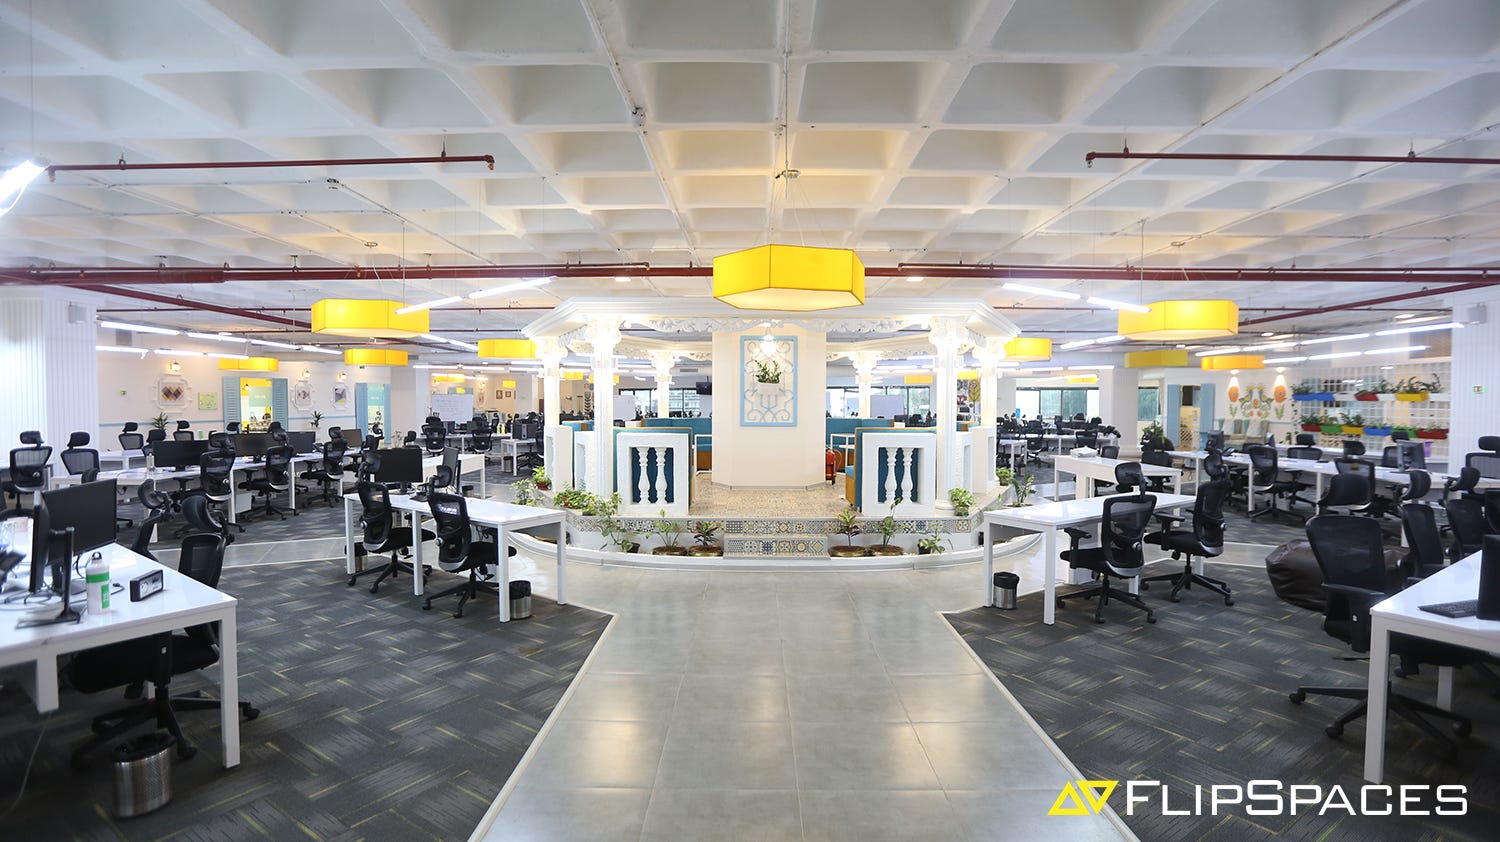 Neo Traditional Spaces Conventionally Modern Flipspaces